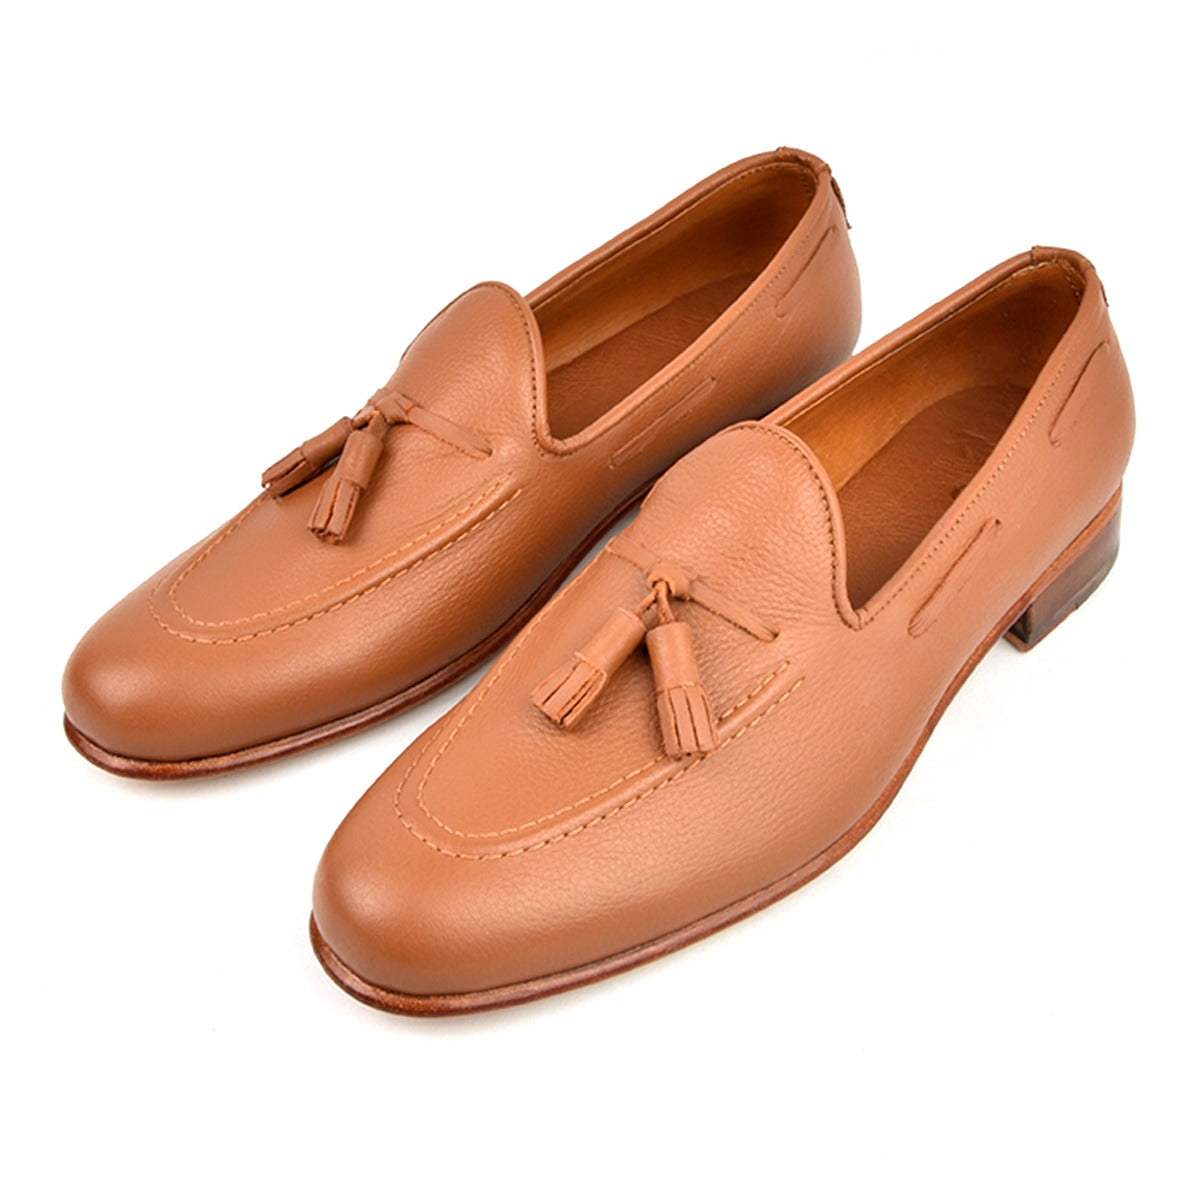 Tassel Loafer by Caballero - BROWN